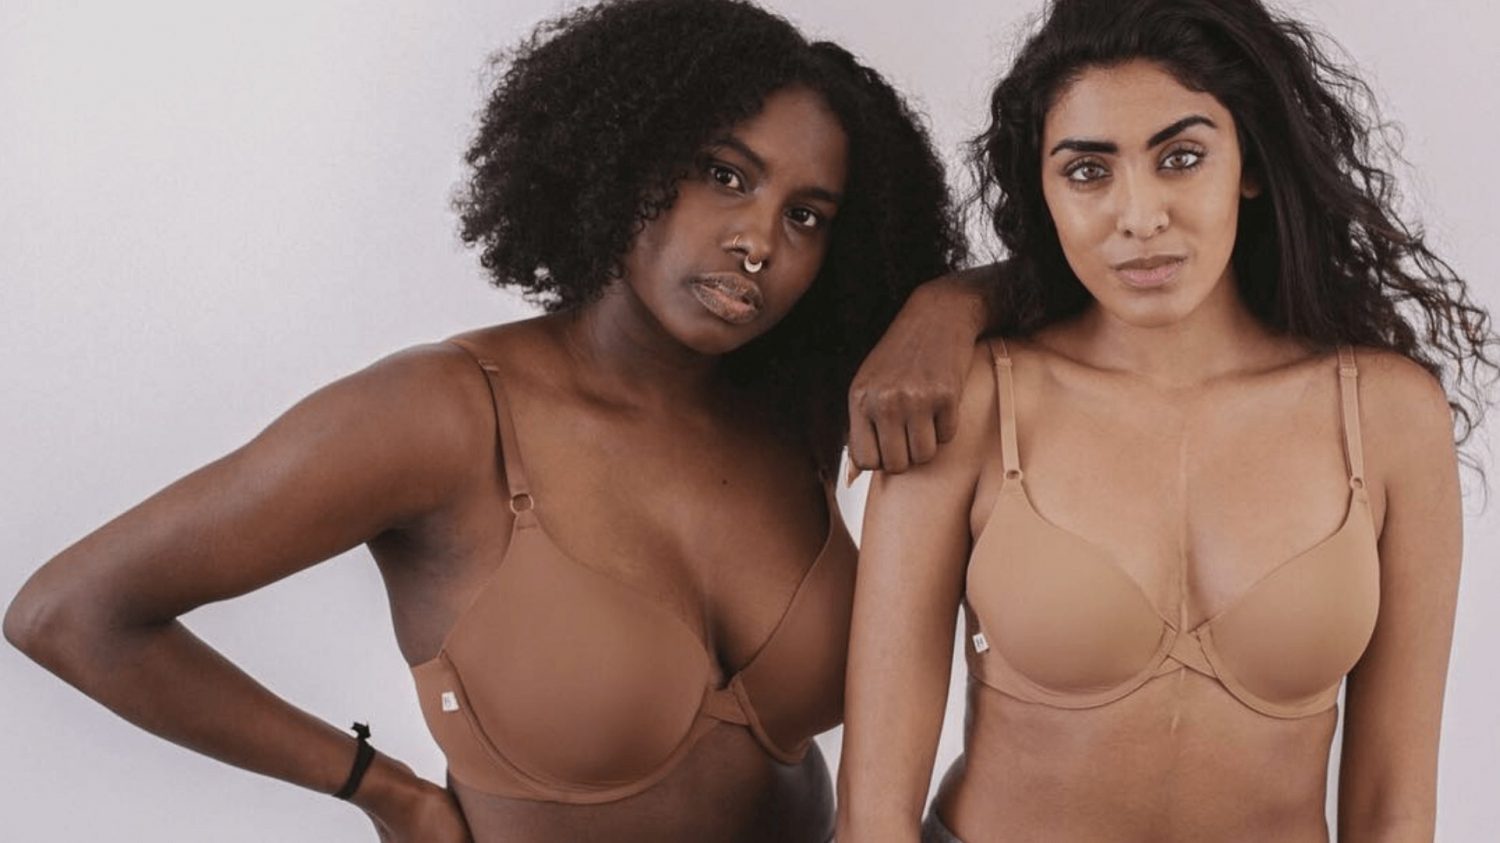 Limited-Edition Vegan Silk-Free RBG Bras Launched By Harper Wilde